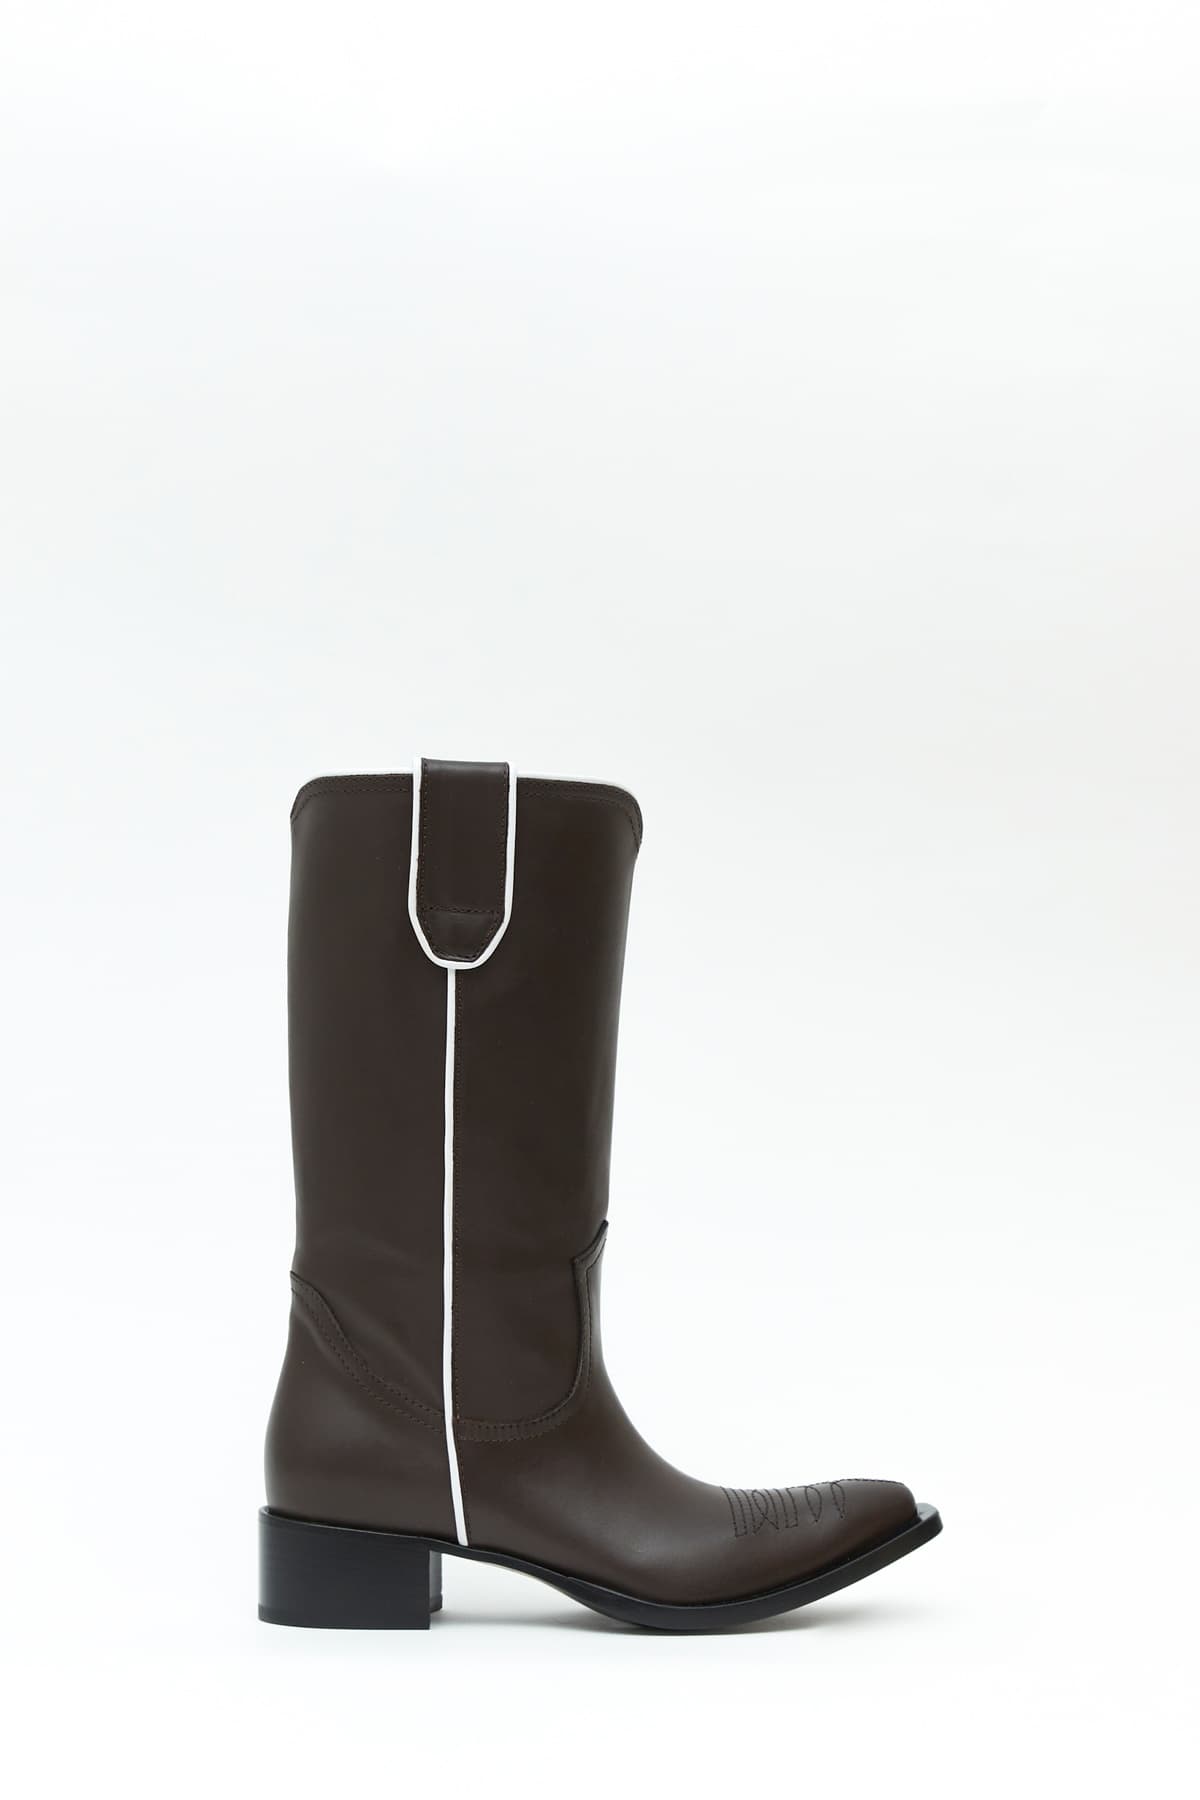 Sideview of Taxhoney boot in nutella-brown from the Haus of Honey fall-winter 2023-24